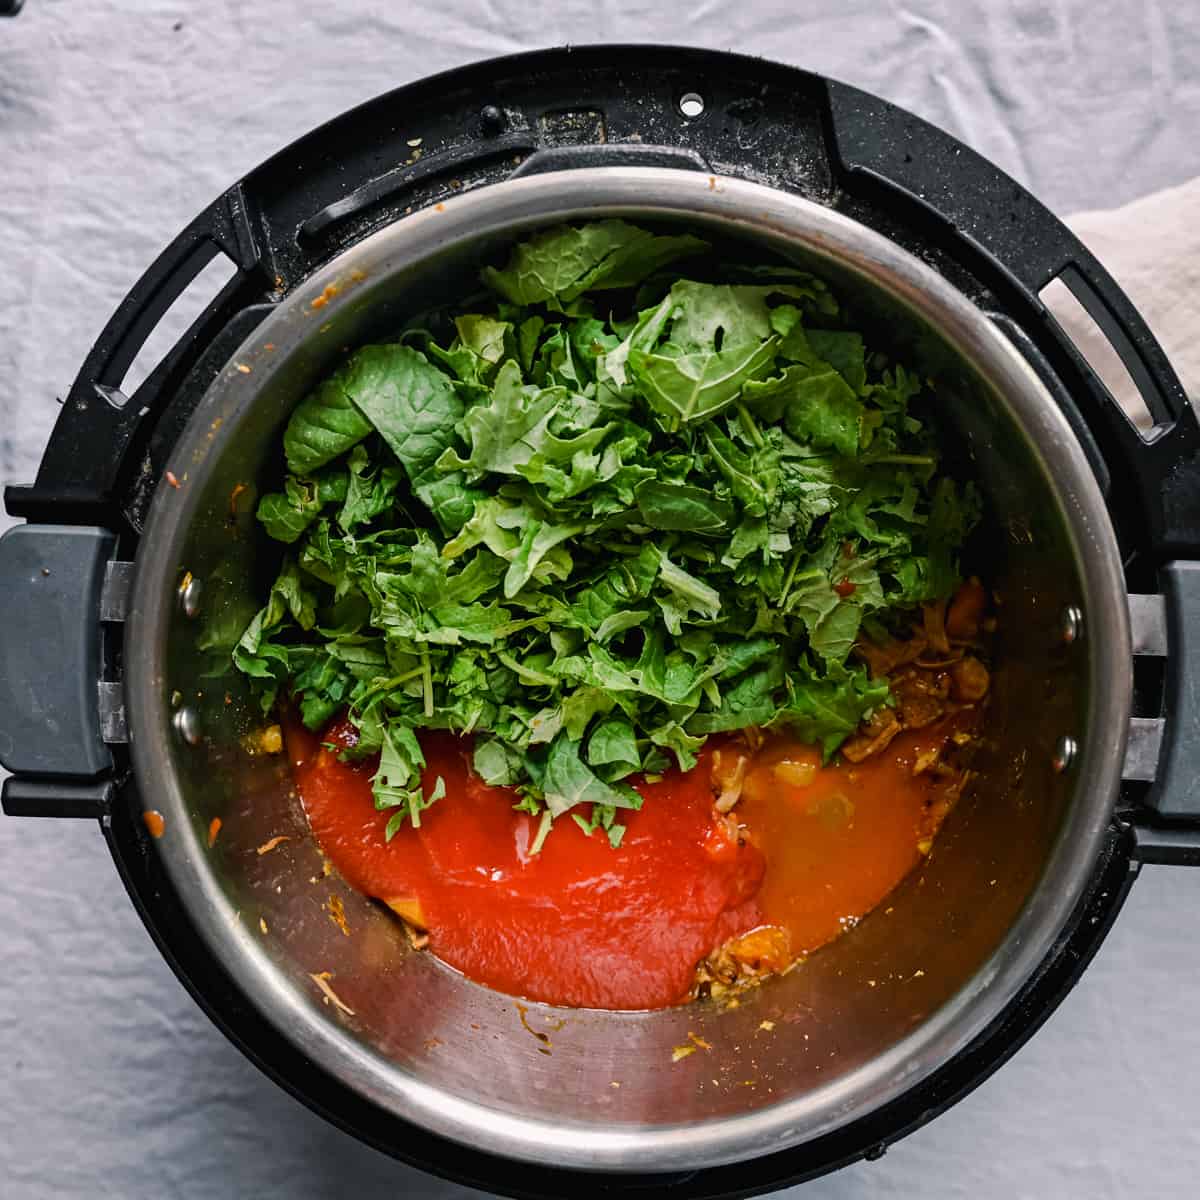 tomato sauce and kale sitting in instant pot jackfruit curry